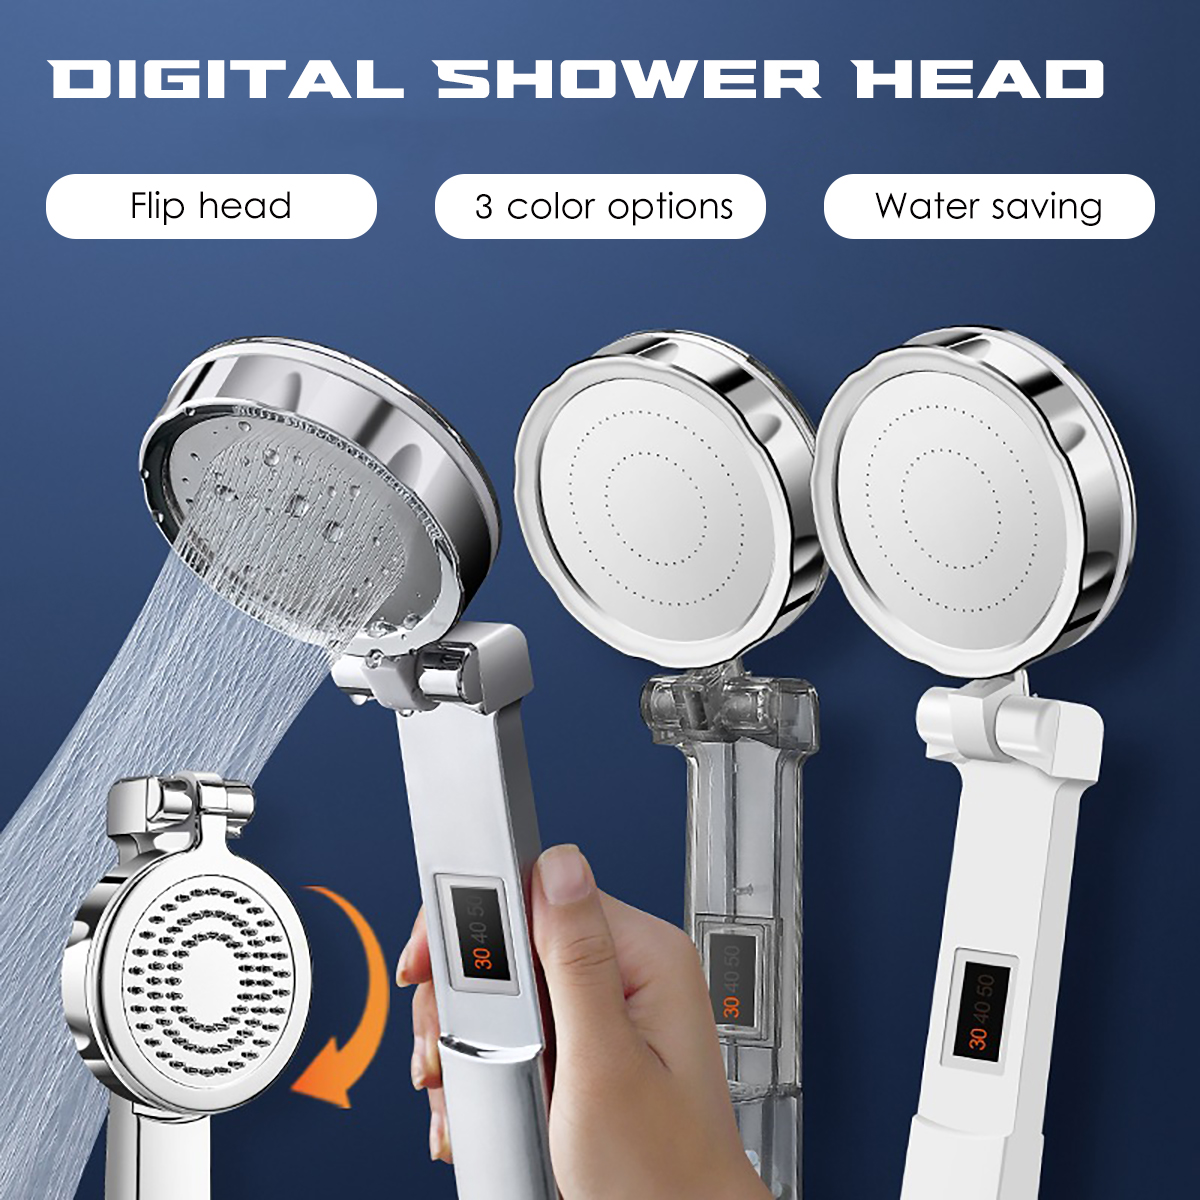 2-PCS-Digital-Shower-Head-Clamshell-Hand-Held-Pressurized-Back-Cover-Rubbing-3-Level-Temperature-Dis-1963145-1